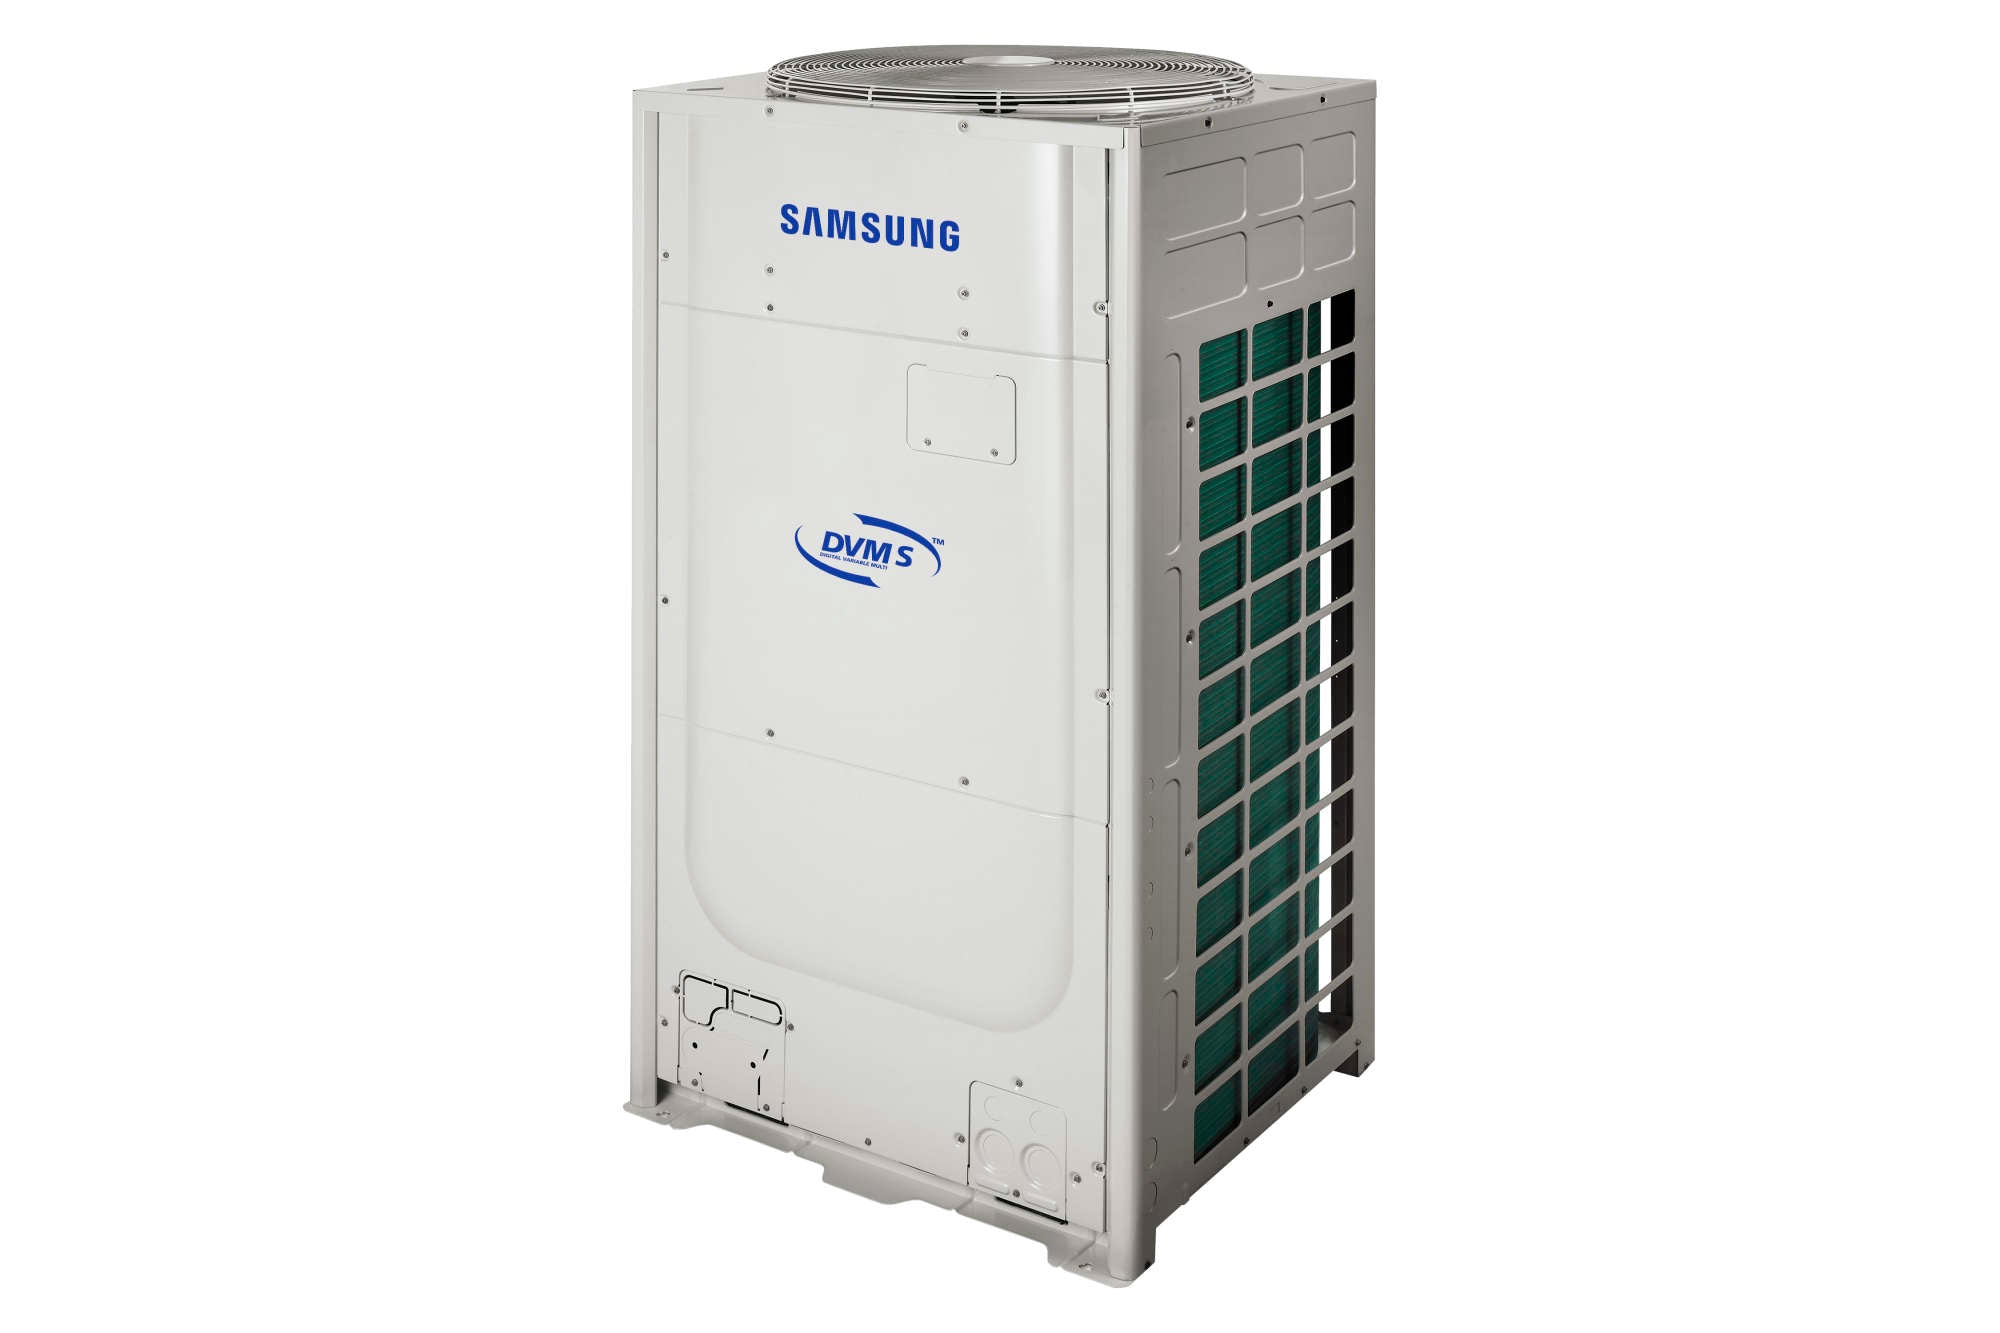 Samsung AM120FXVAFR/AA Air Conditioner 120,000 BTU Cooling and Heating System Outdoor Unit